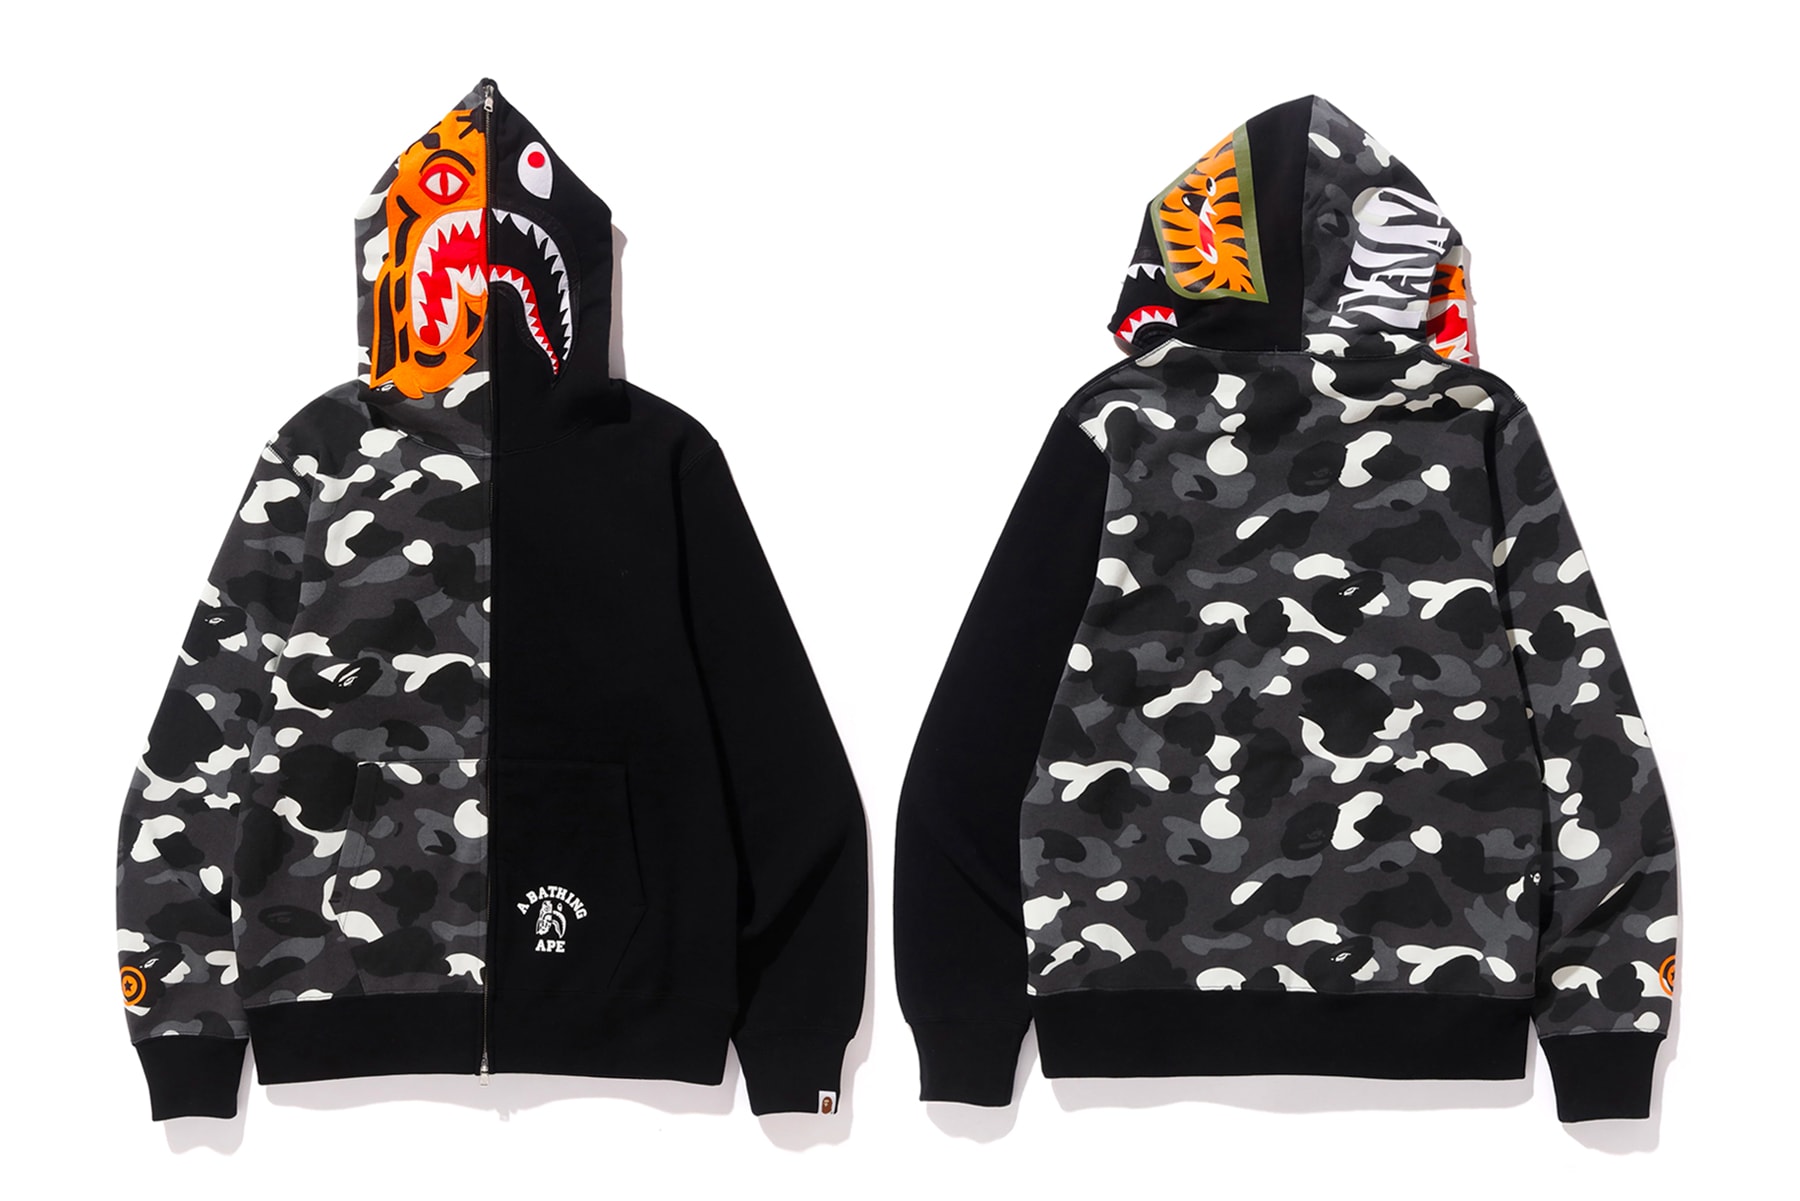 BAPE A Bathing Ape Tiger Shark Collection Spring/Summer 2018 hoodies glow in the dark